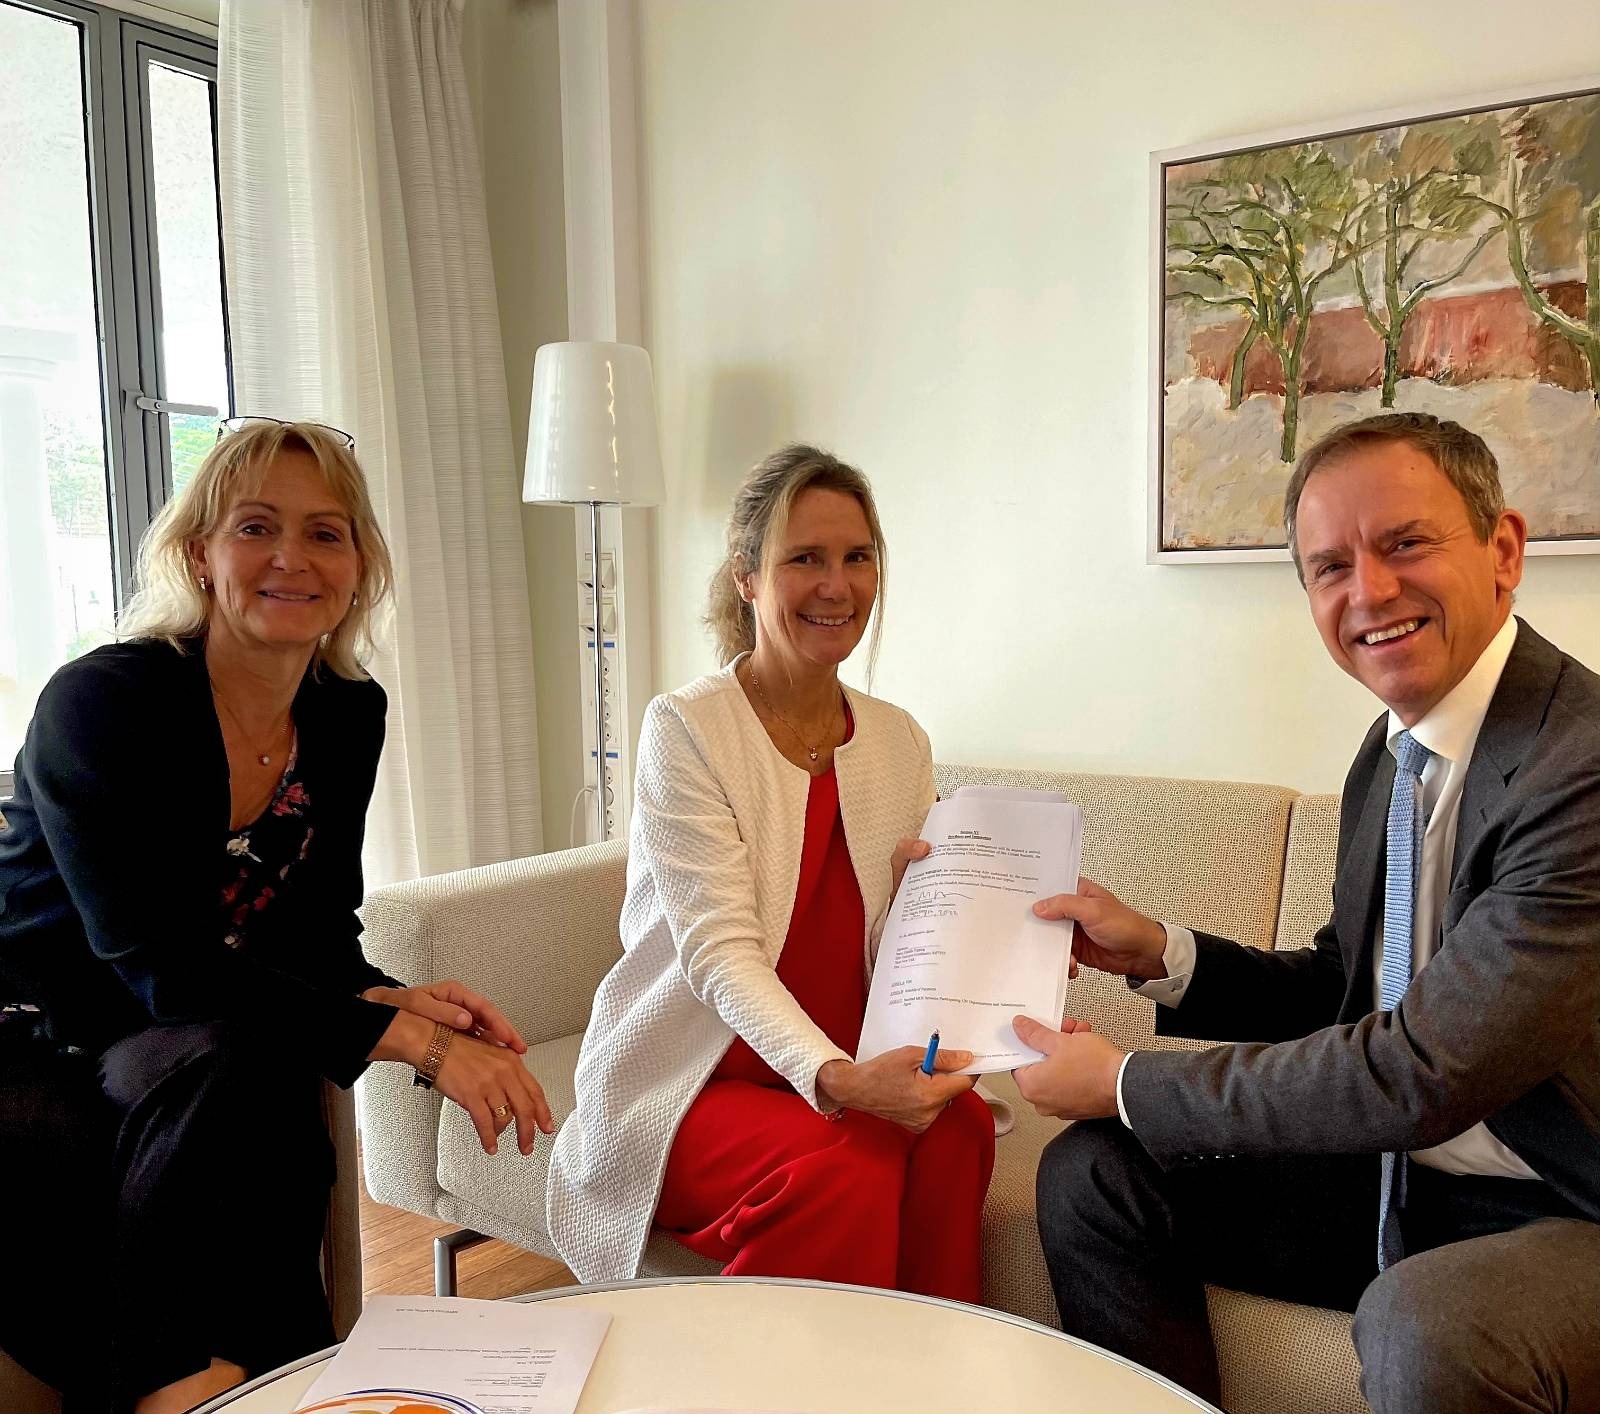 Sweden signs a partnership agreement with UN Kenya towards pooled funding for SDGs